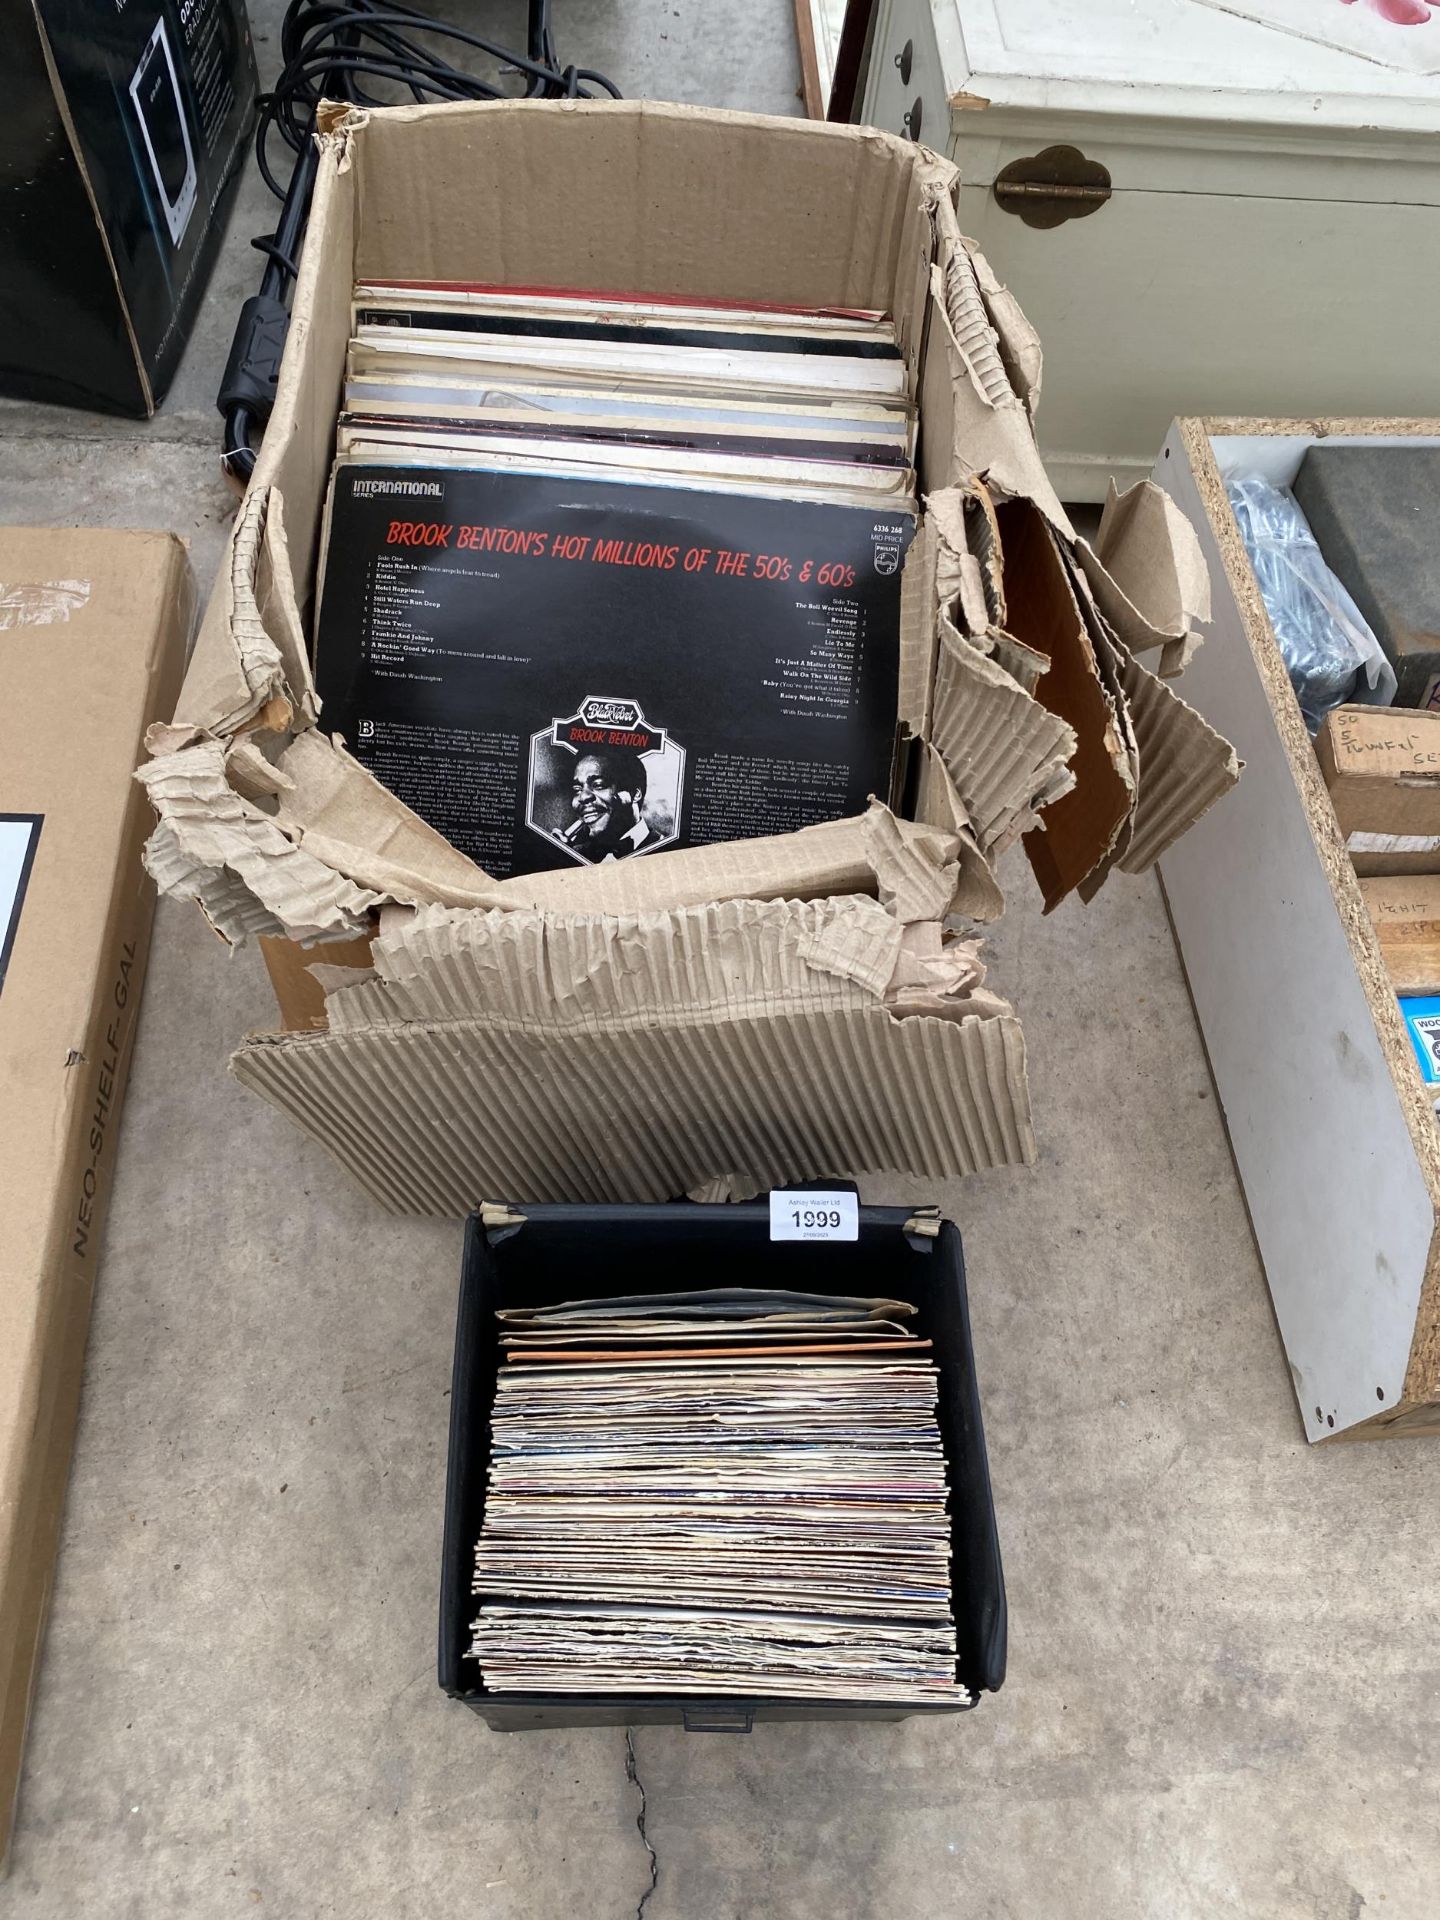 AN ASSORTMENT OF LP RECORDS AND 7" SINGLES